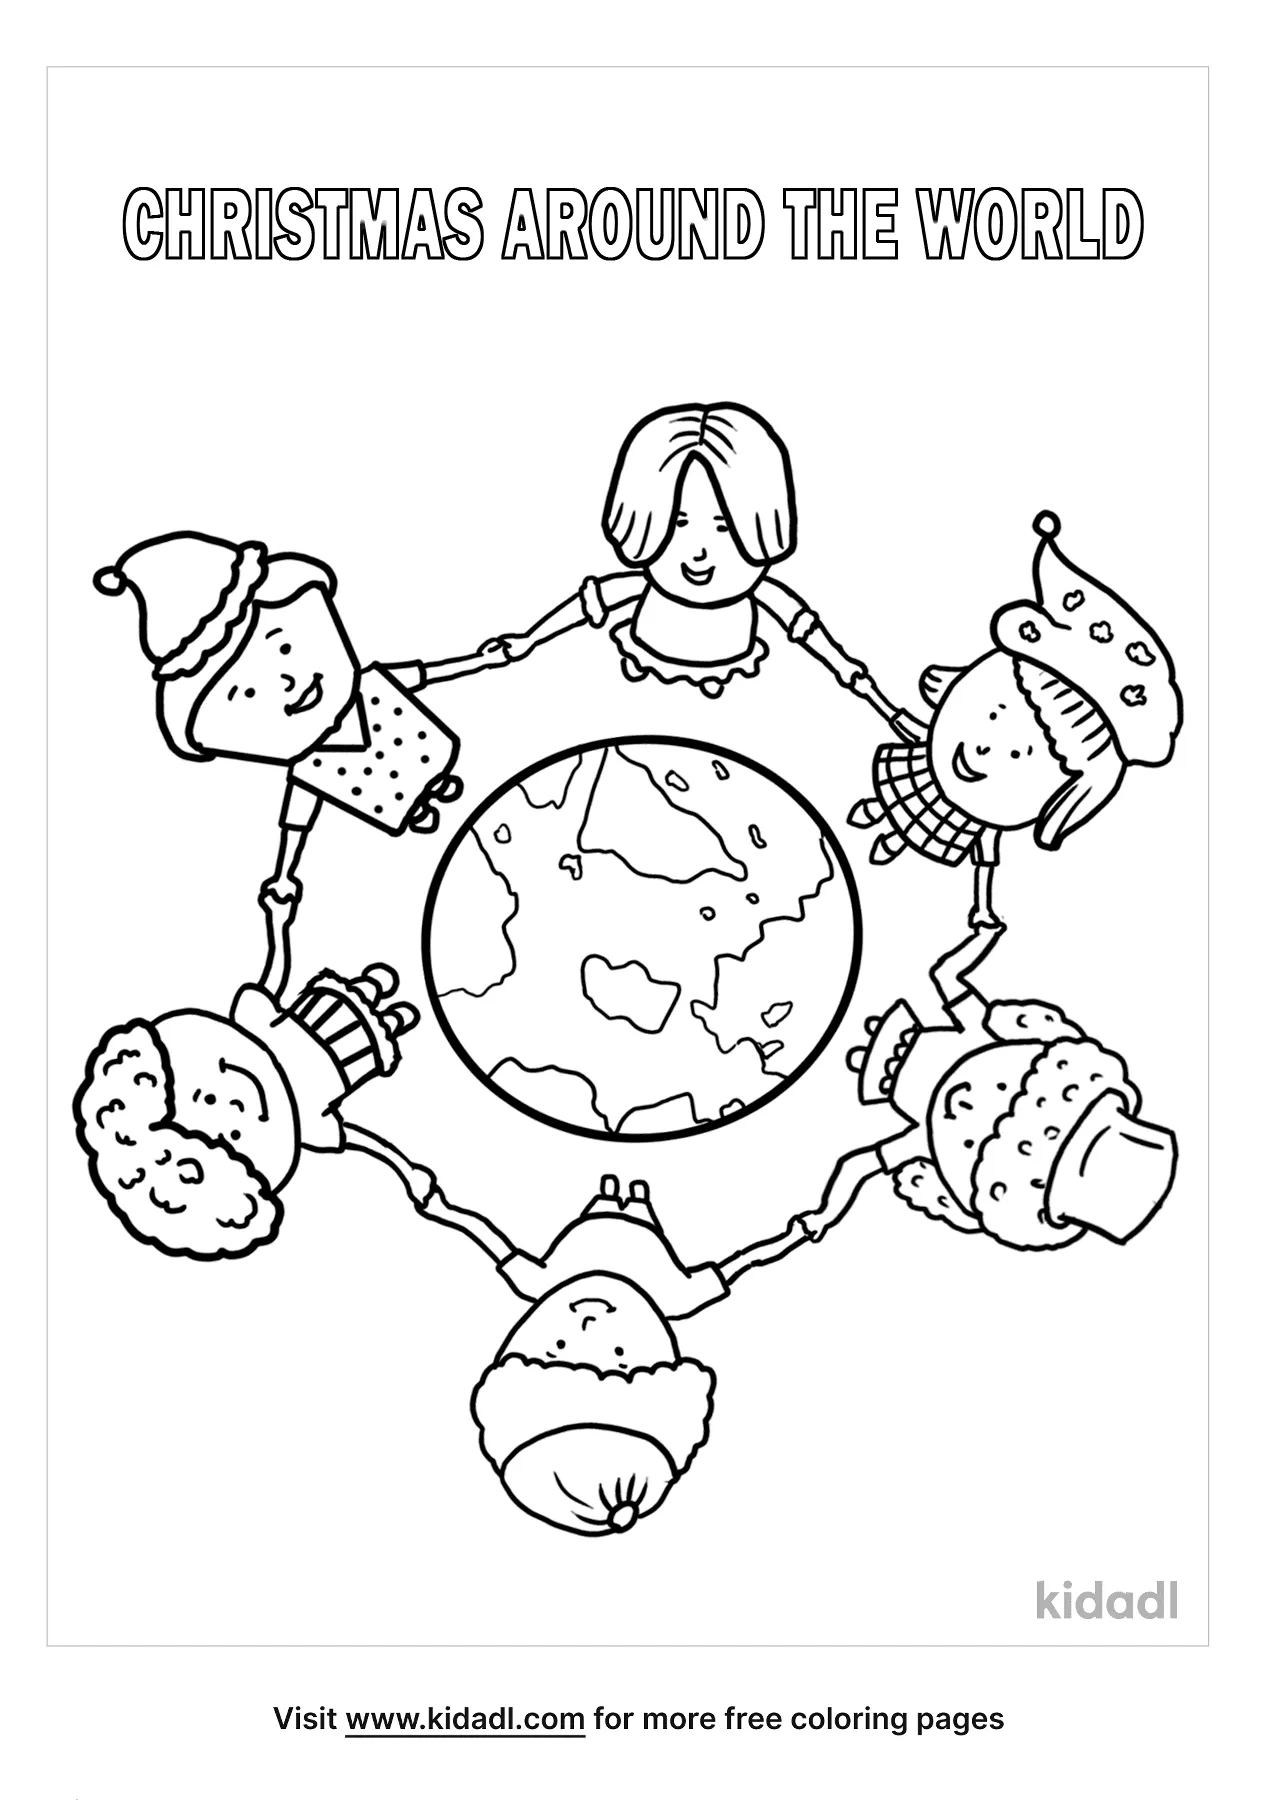 Free christmas around the world coloring page coloring page printables